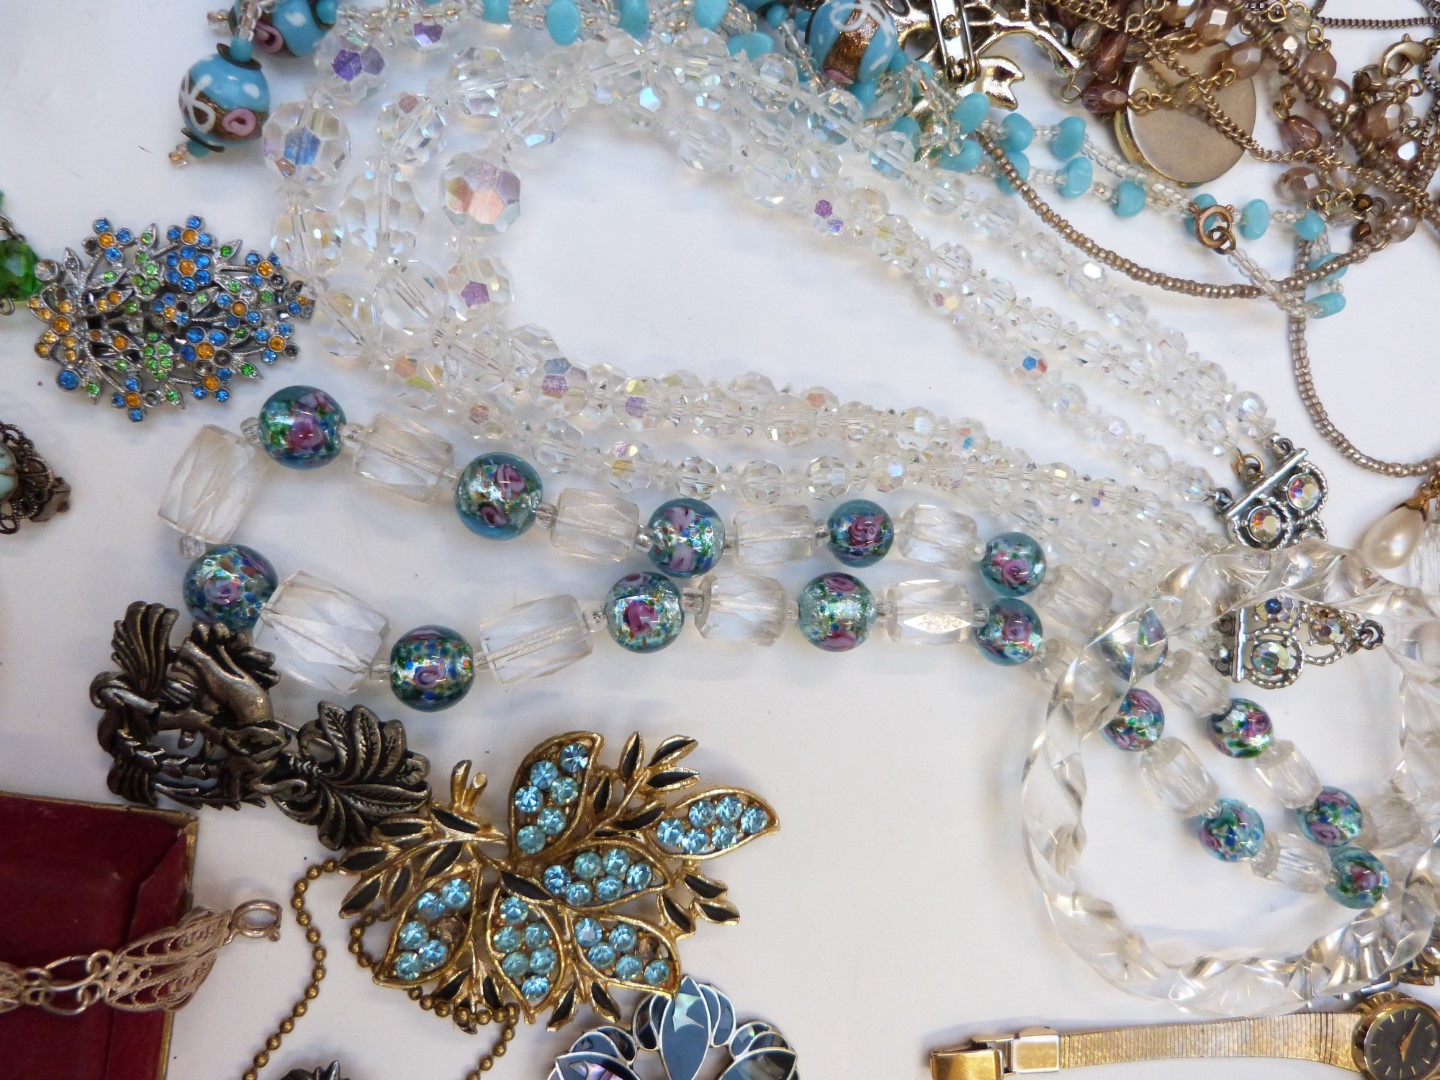 A large collection of costume jewellery including agate beads, vintage brooches, vintage earrings, - Image 3 of 10